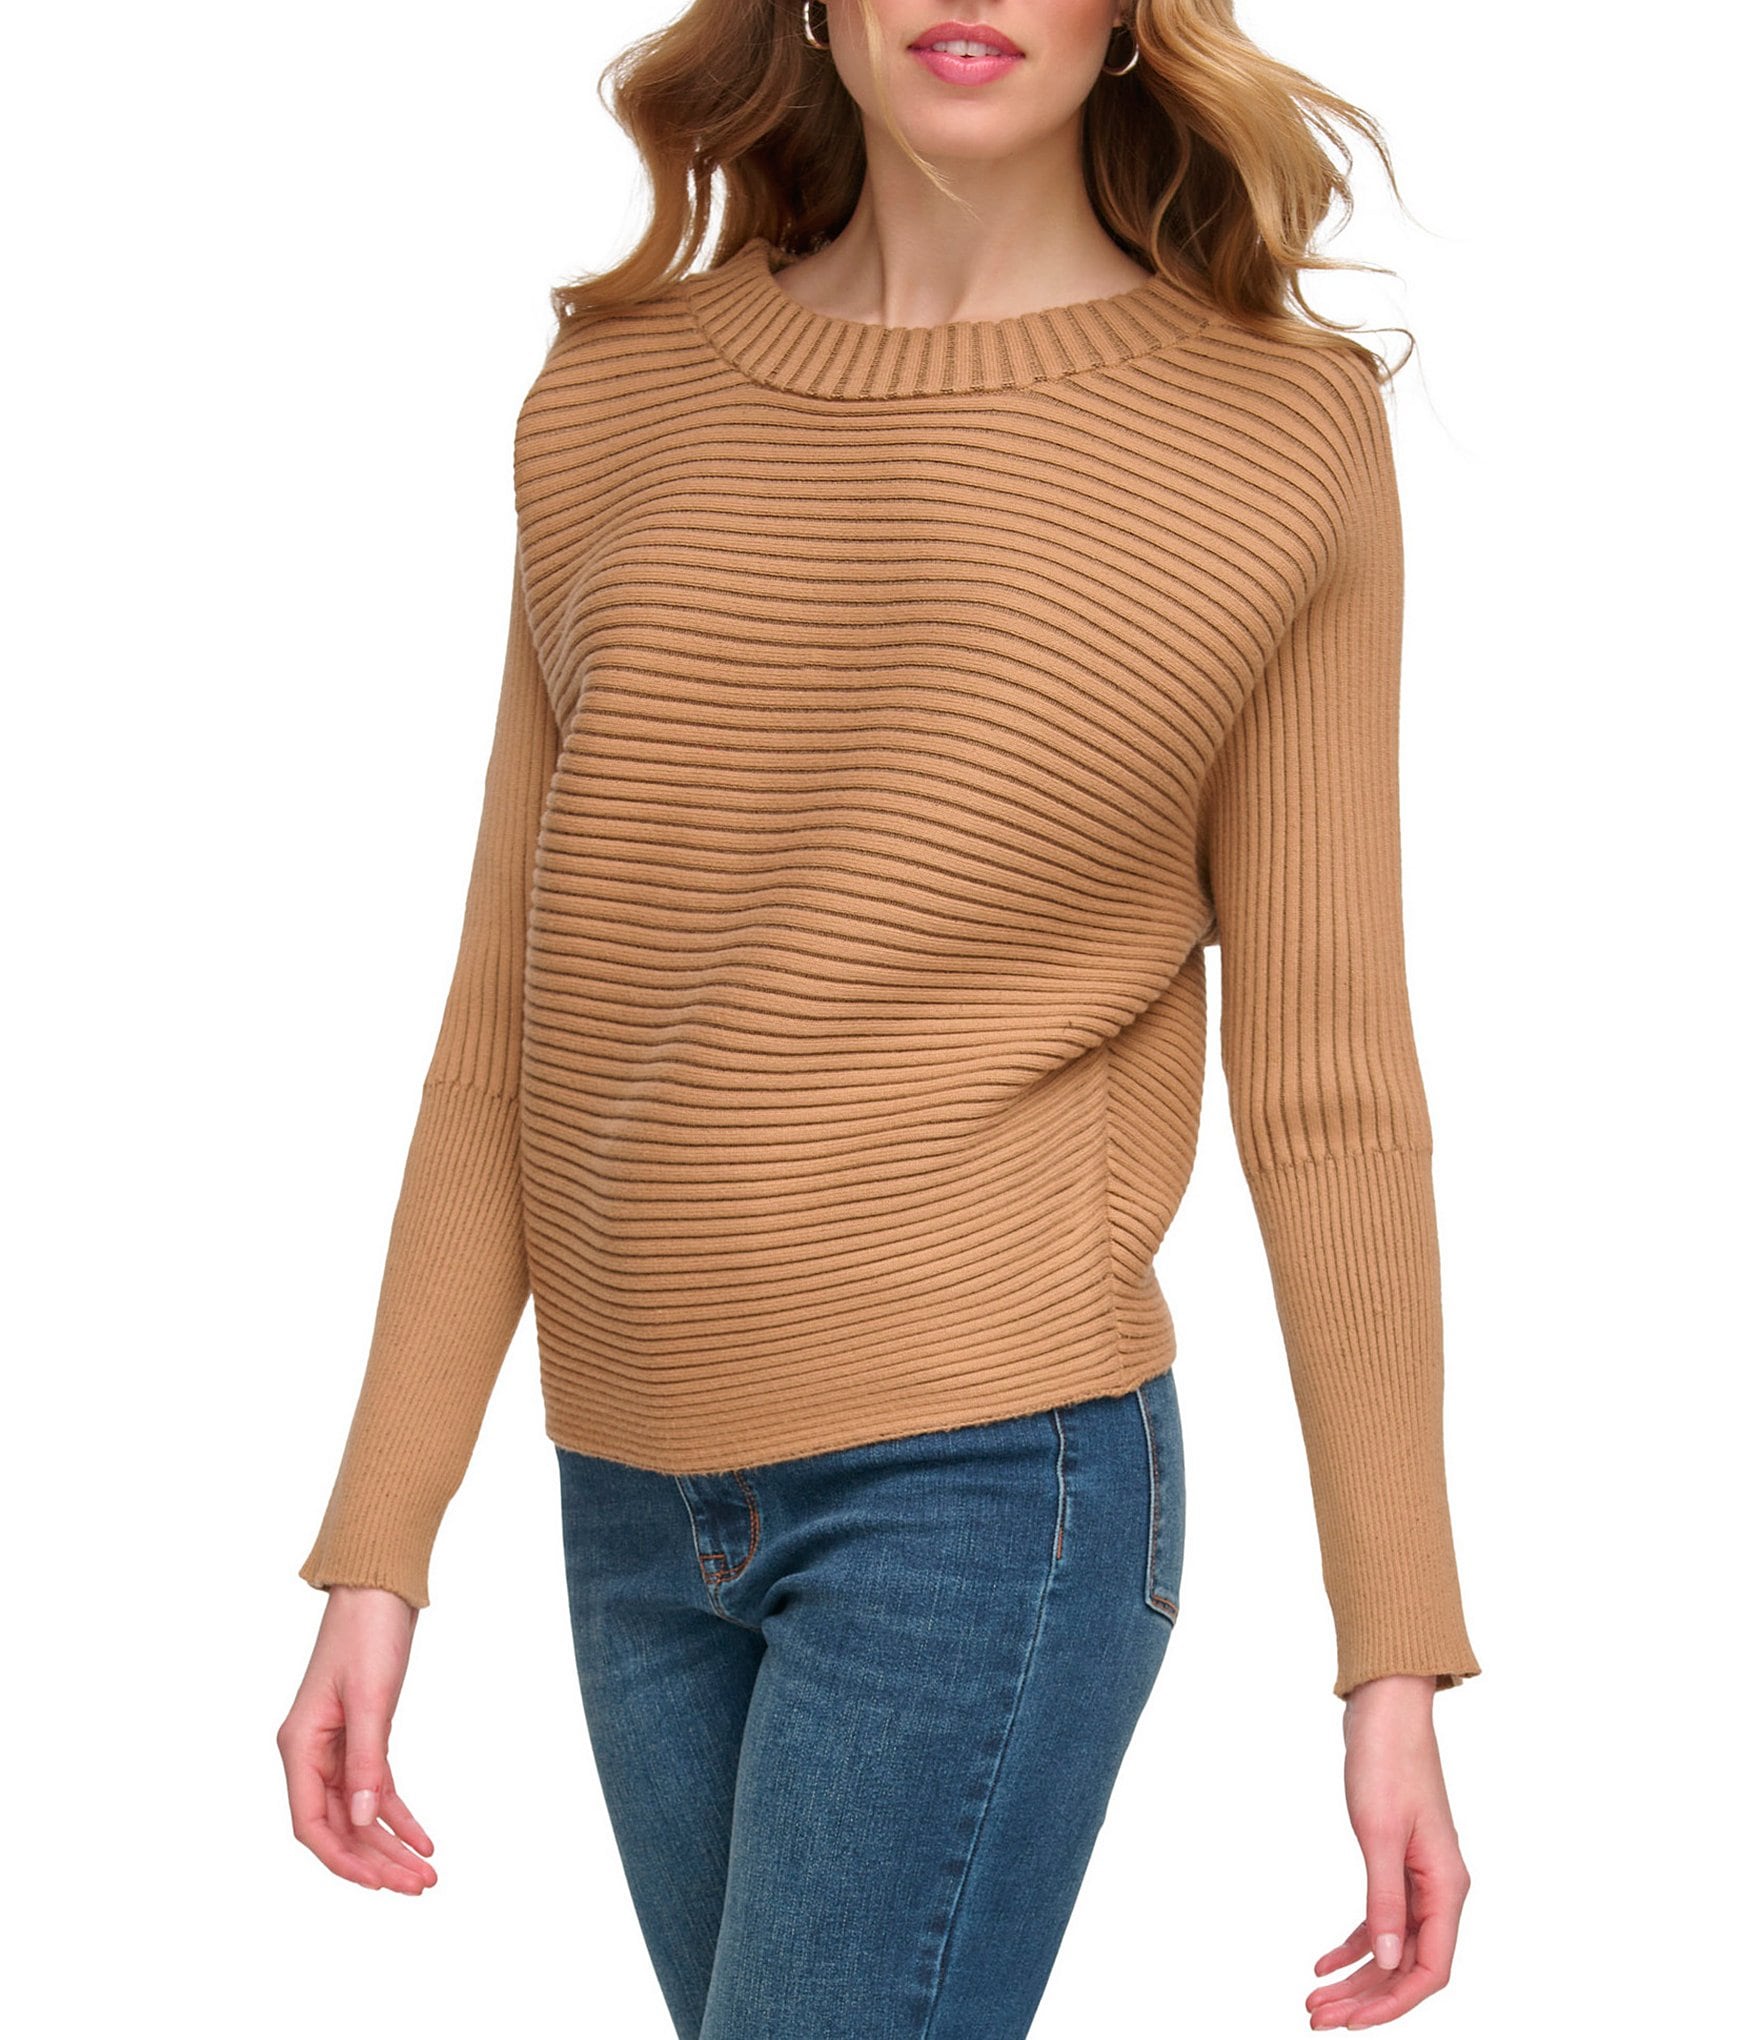 Women Long Sleeve Sweater Casual Elegant Round Neck Star Pattern  Plus,clearence,Cute Stuff Under 5 Dollars,Lightning+Deals+Today,Prime  Pantry Clearance Items Today only Khaki